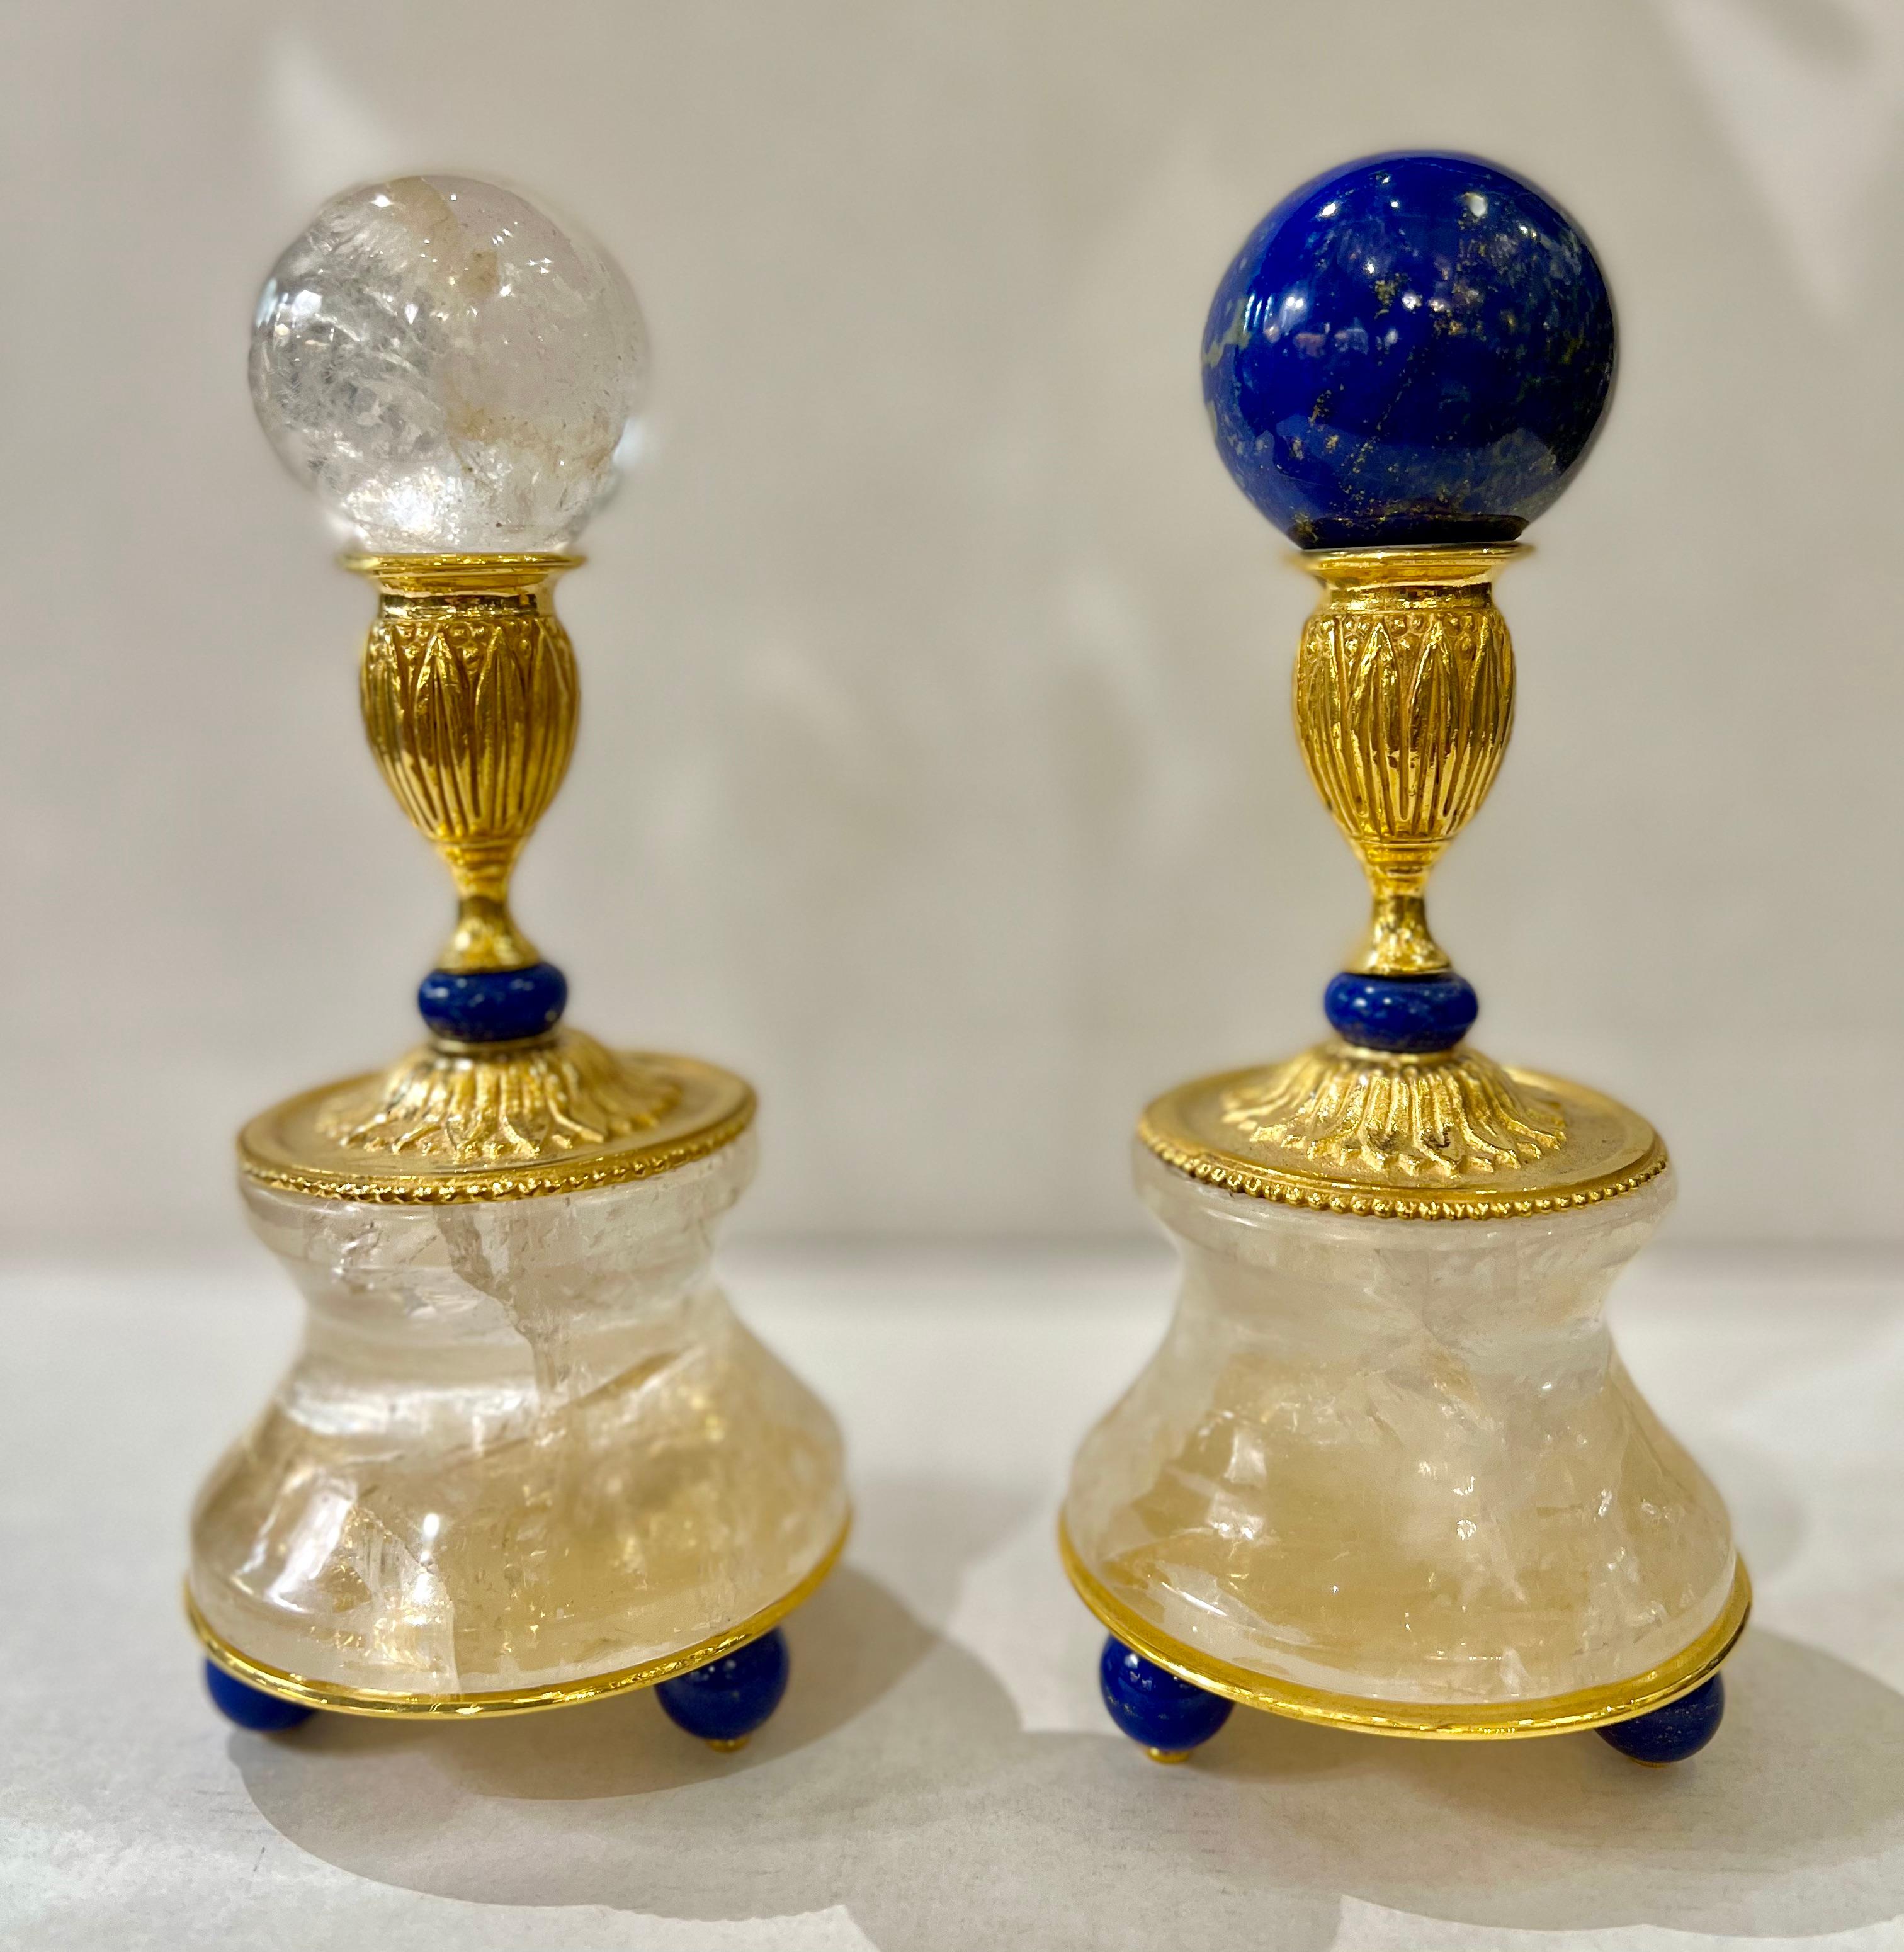 Pair of wonderfull rock crystal support of spheres (rock crystal and Lapis Lazuli, 50 mm)
Made in Paris.
 